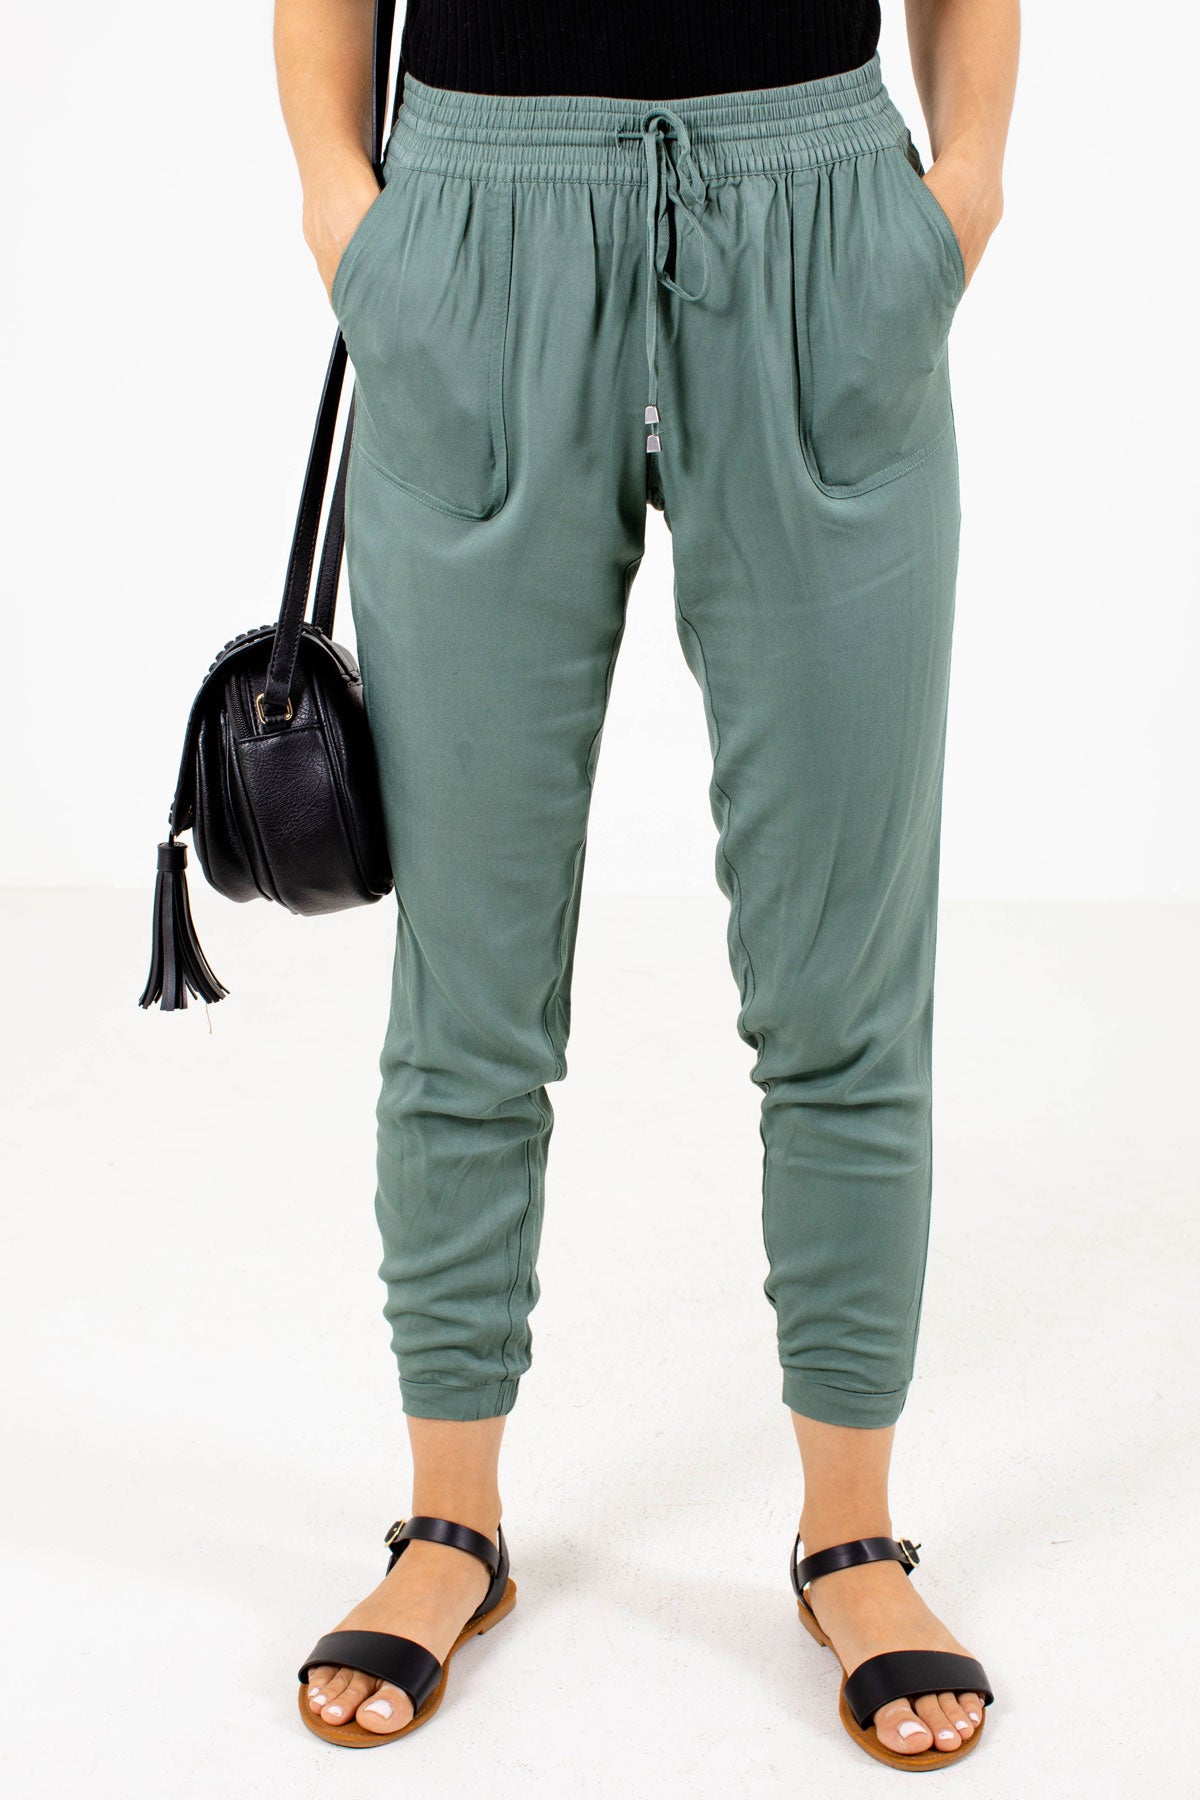 Olive Elastic Cuff Boutique Joggers for Women